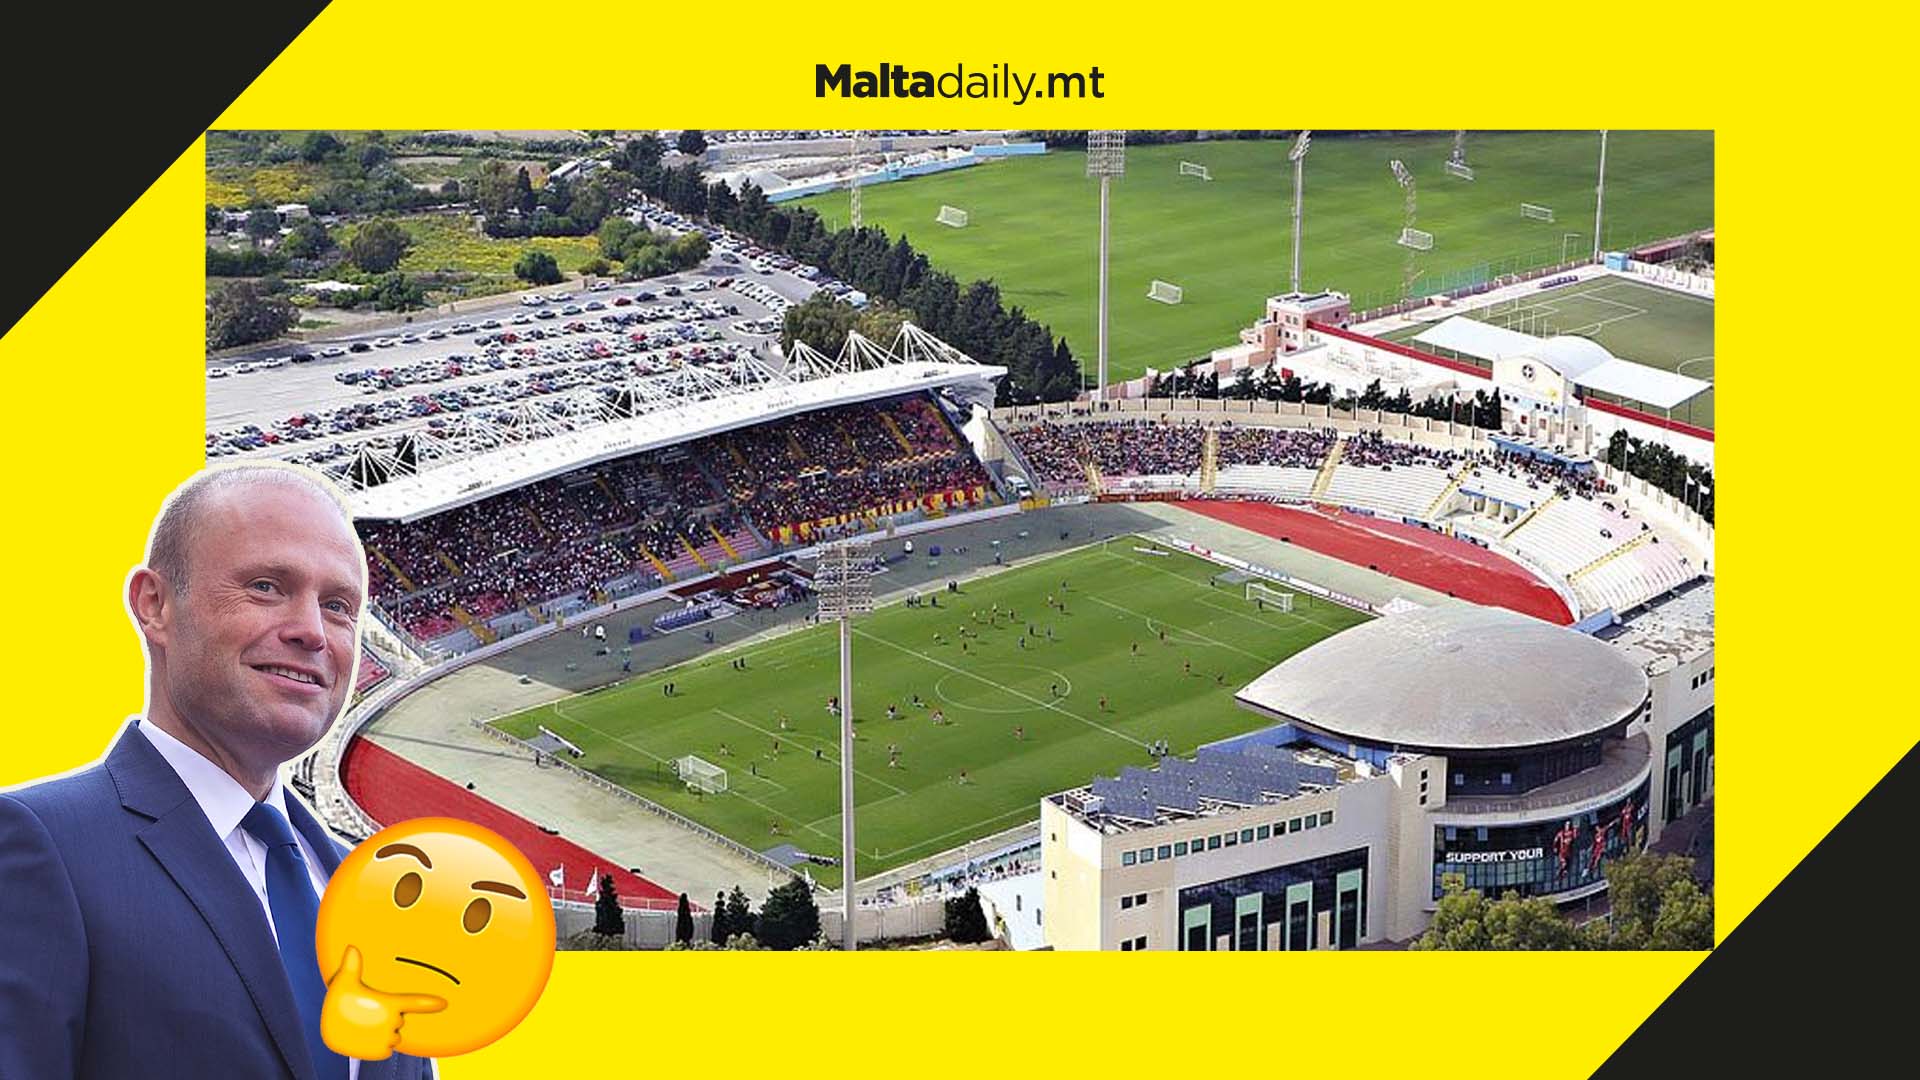 Football in Malta could be played in Summer in near future